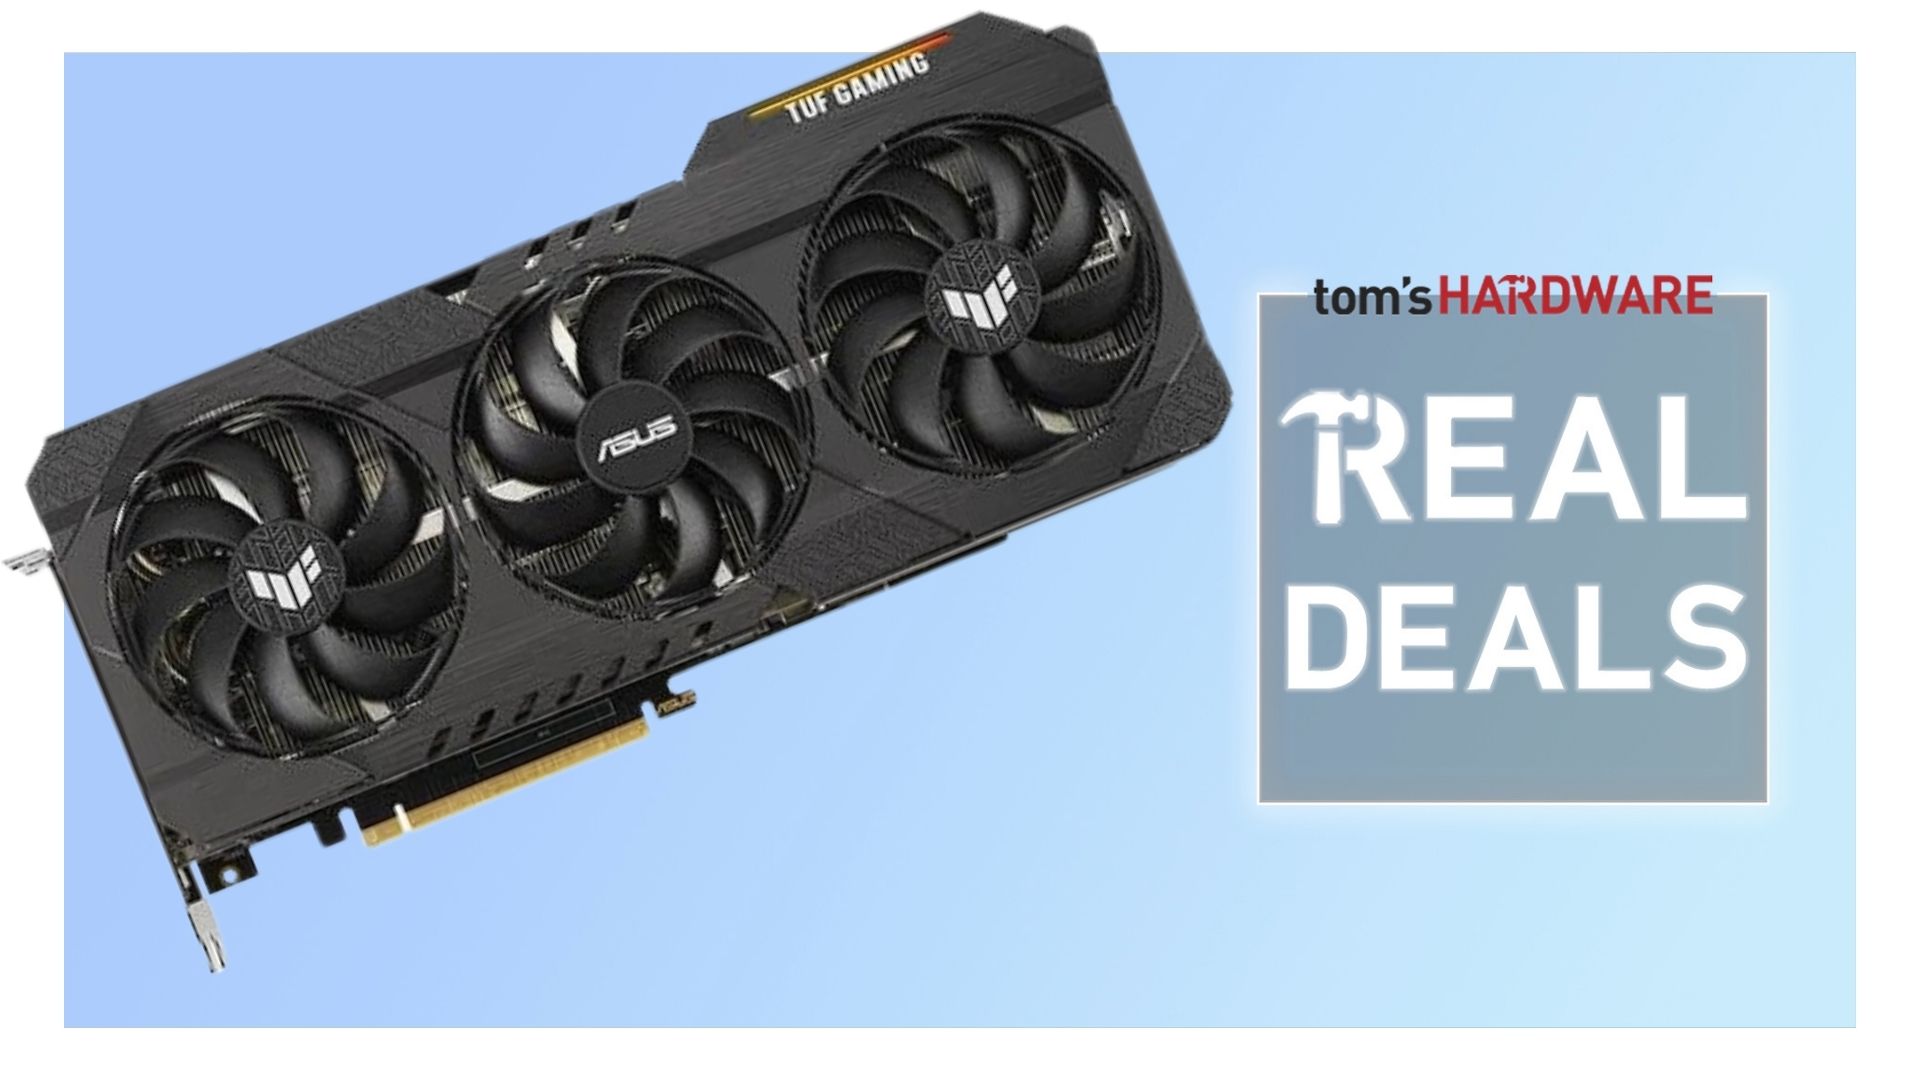 Asus RTX 3070 Ti TUF Gaming OC Prices Reduced to £697: Real Deals